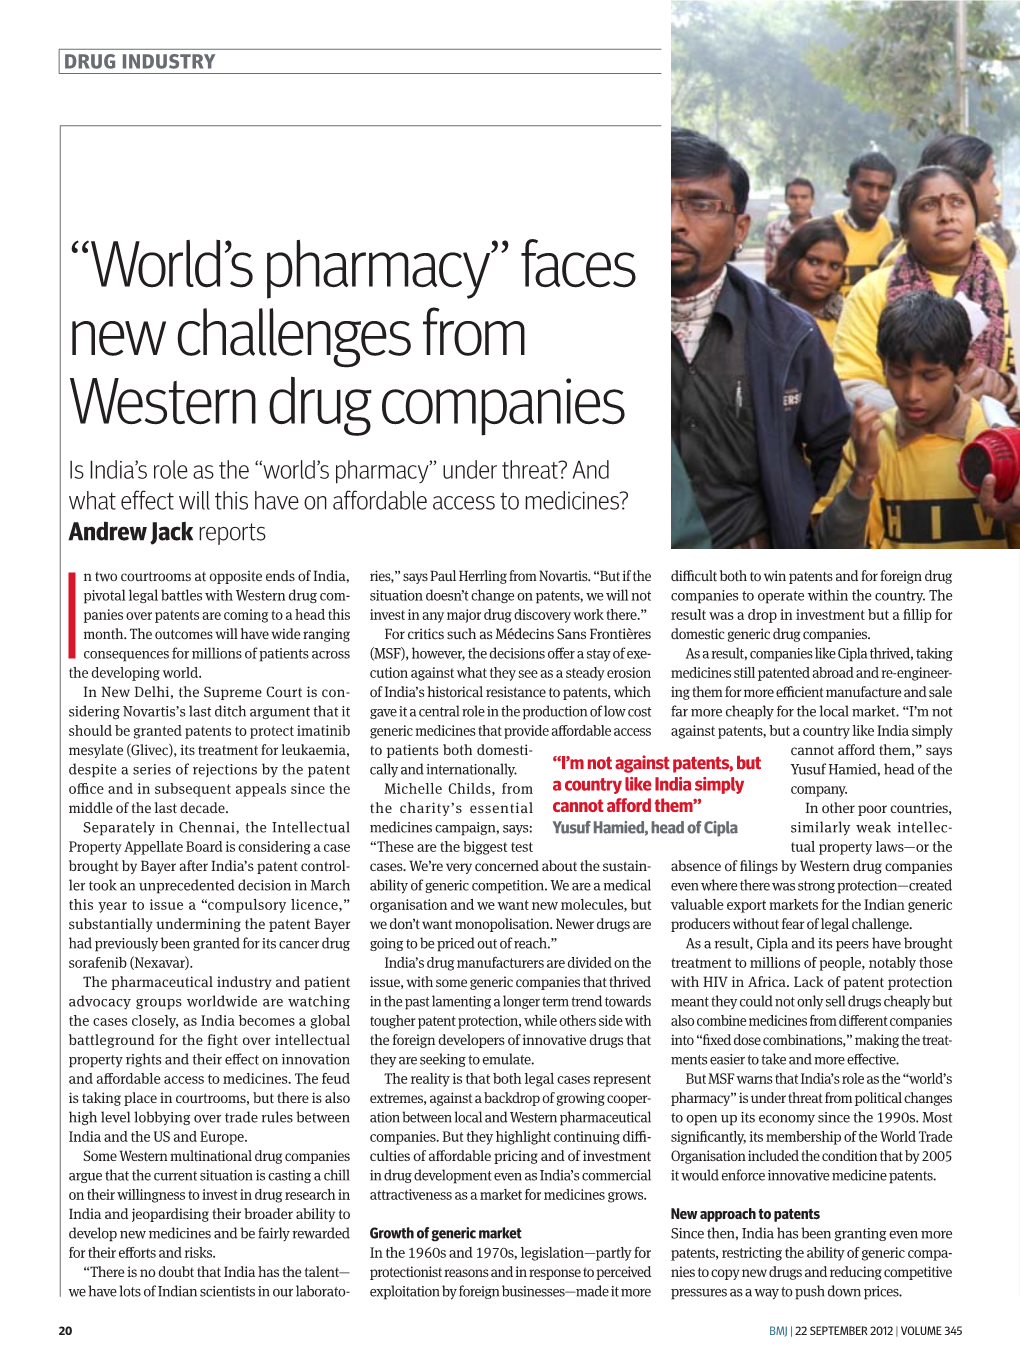 “World's Pharmacy” Faces New Challenges from Western Drug